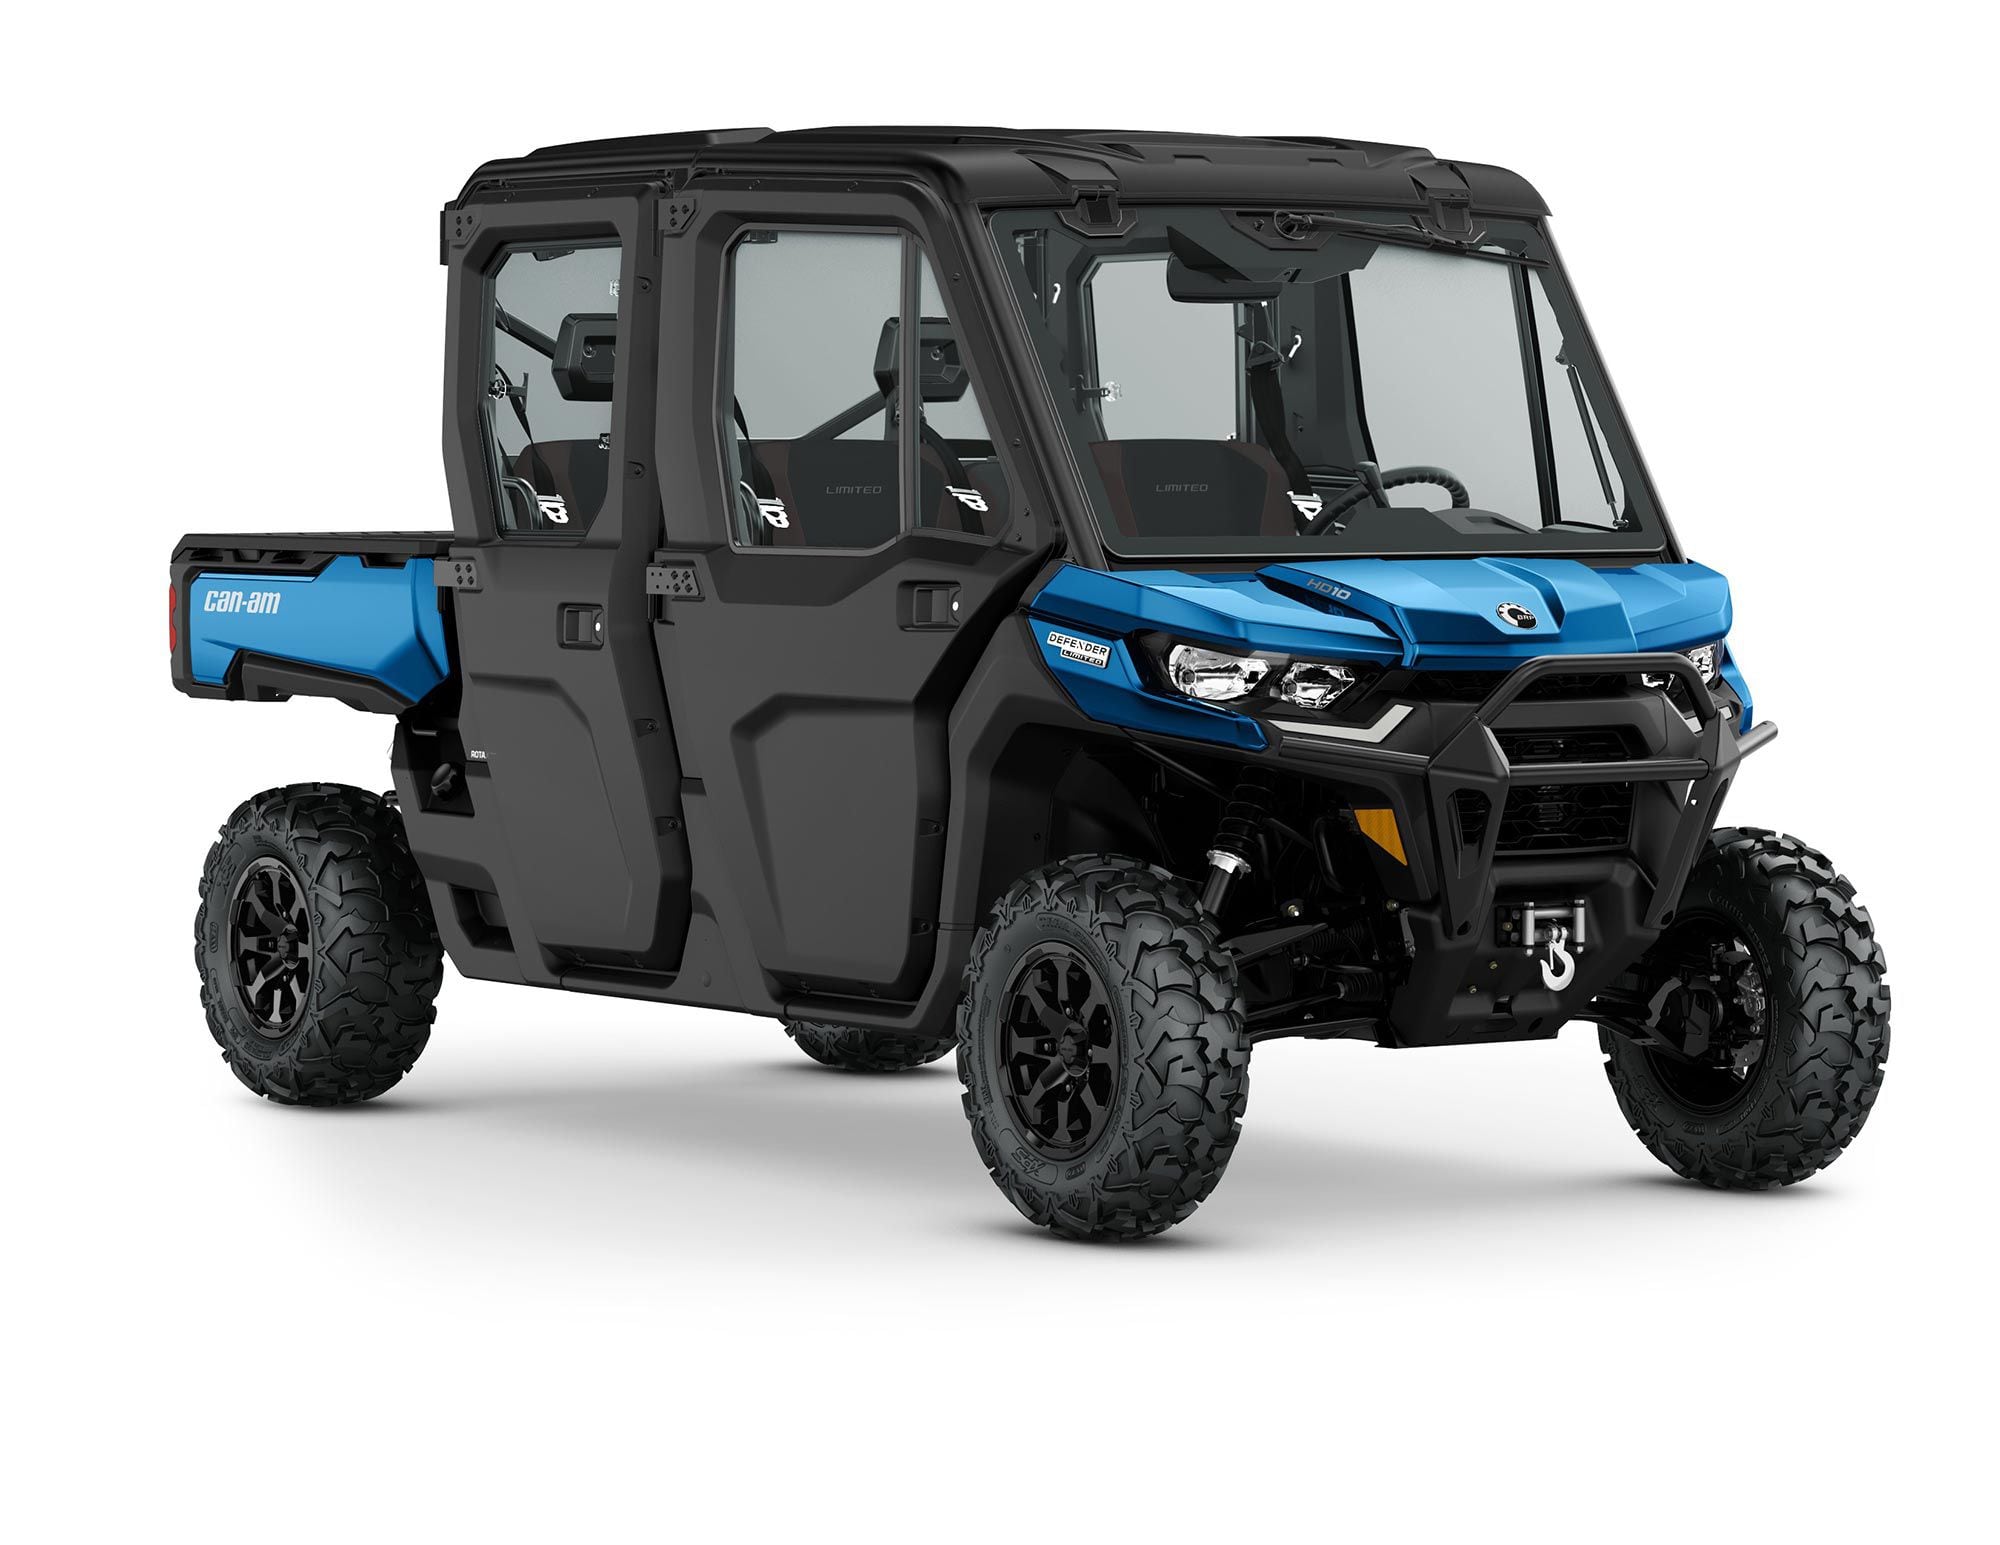 2022 Can Am Defender Limited Max Er S Guide Specs Photos Utv Driver - Can Am Defender Limited Seat Covers